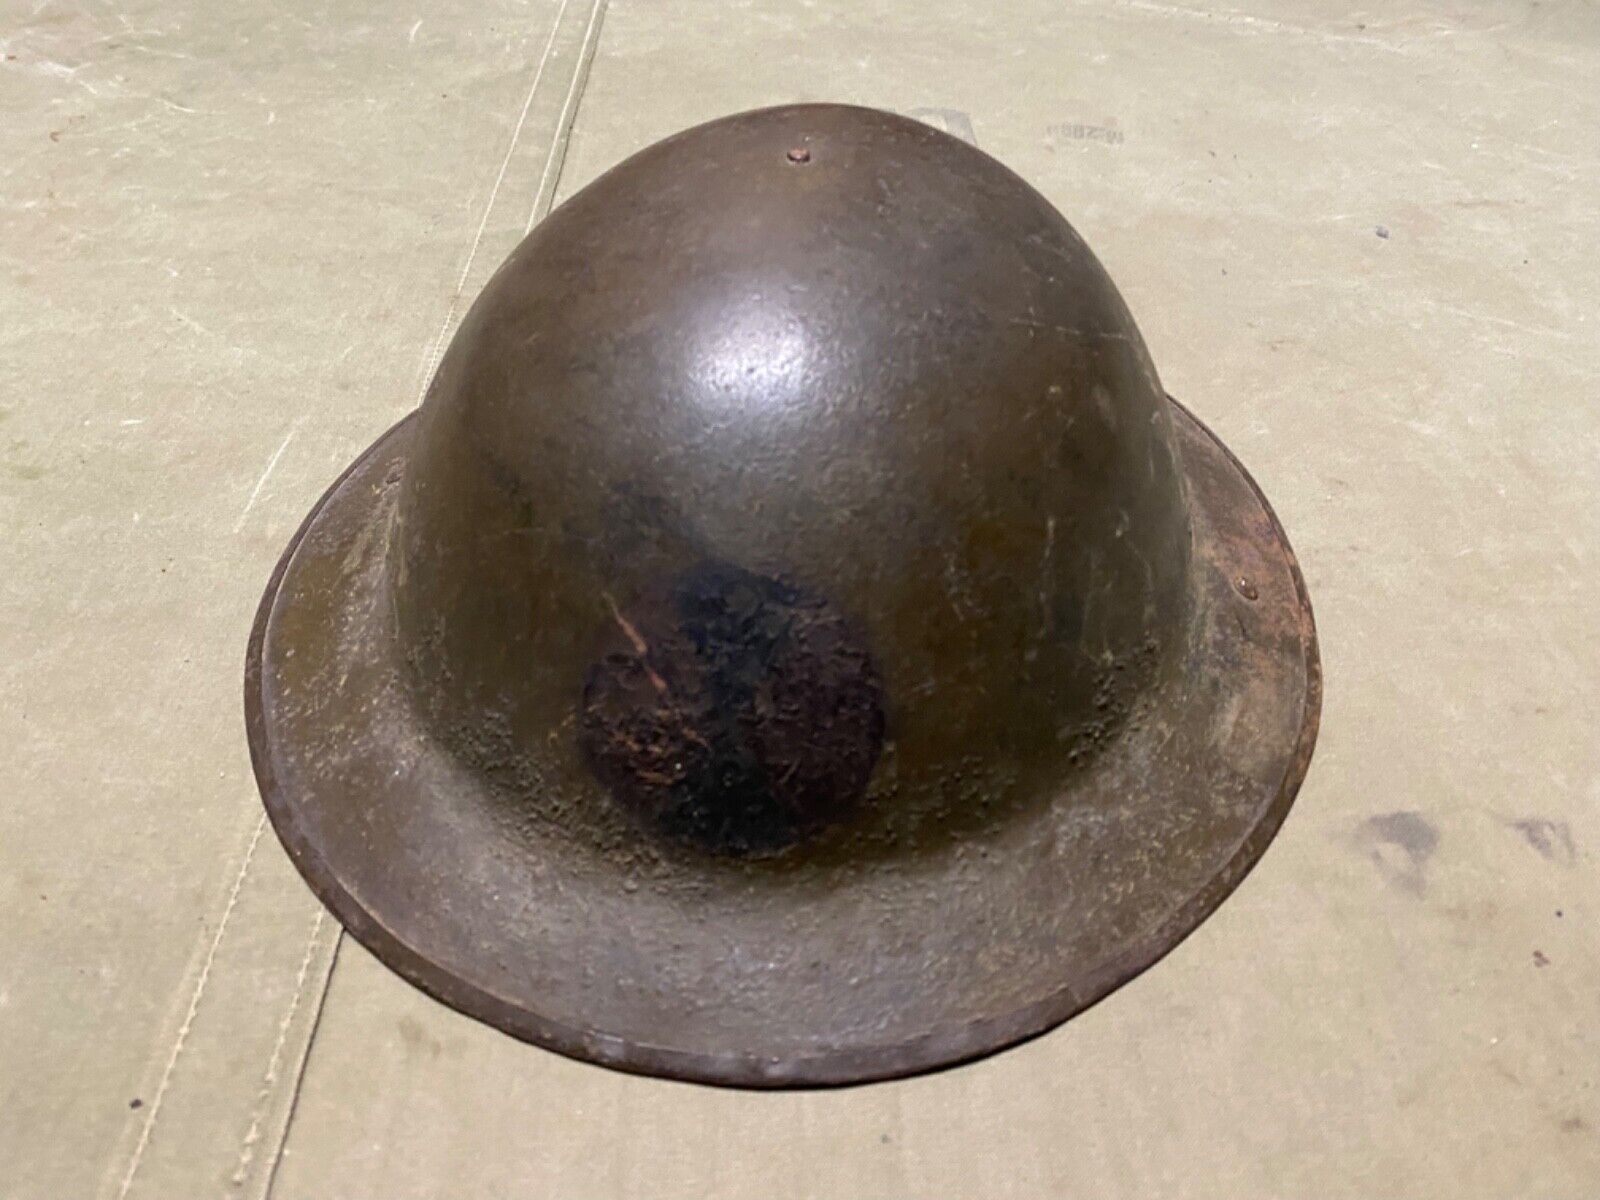 ORIGINAL WWI US ARMY M1917 DOUGHBOY 7TH INFANTRY DIVISION HELMET & STRAP-PAINTED